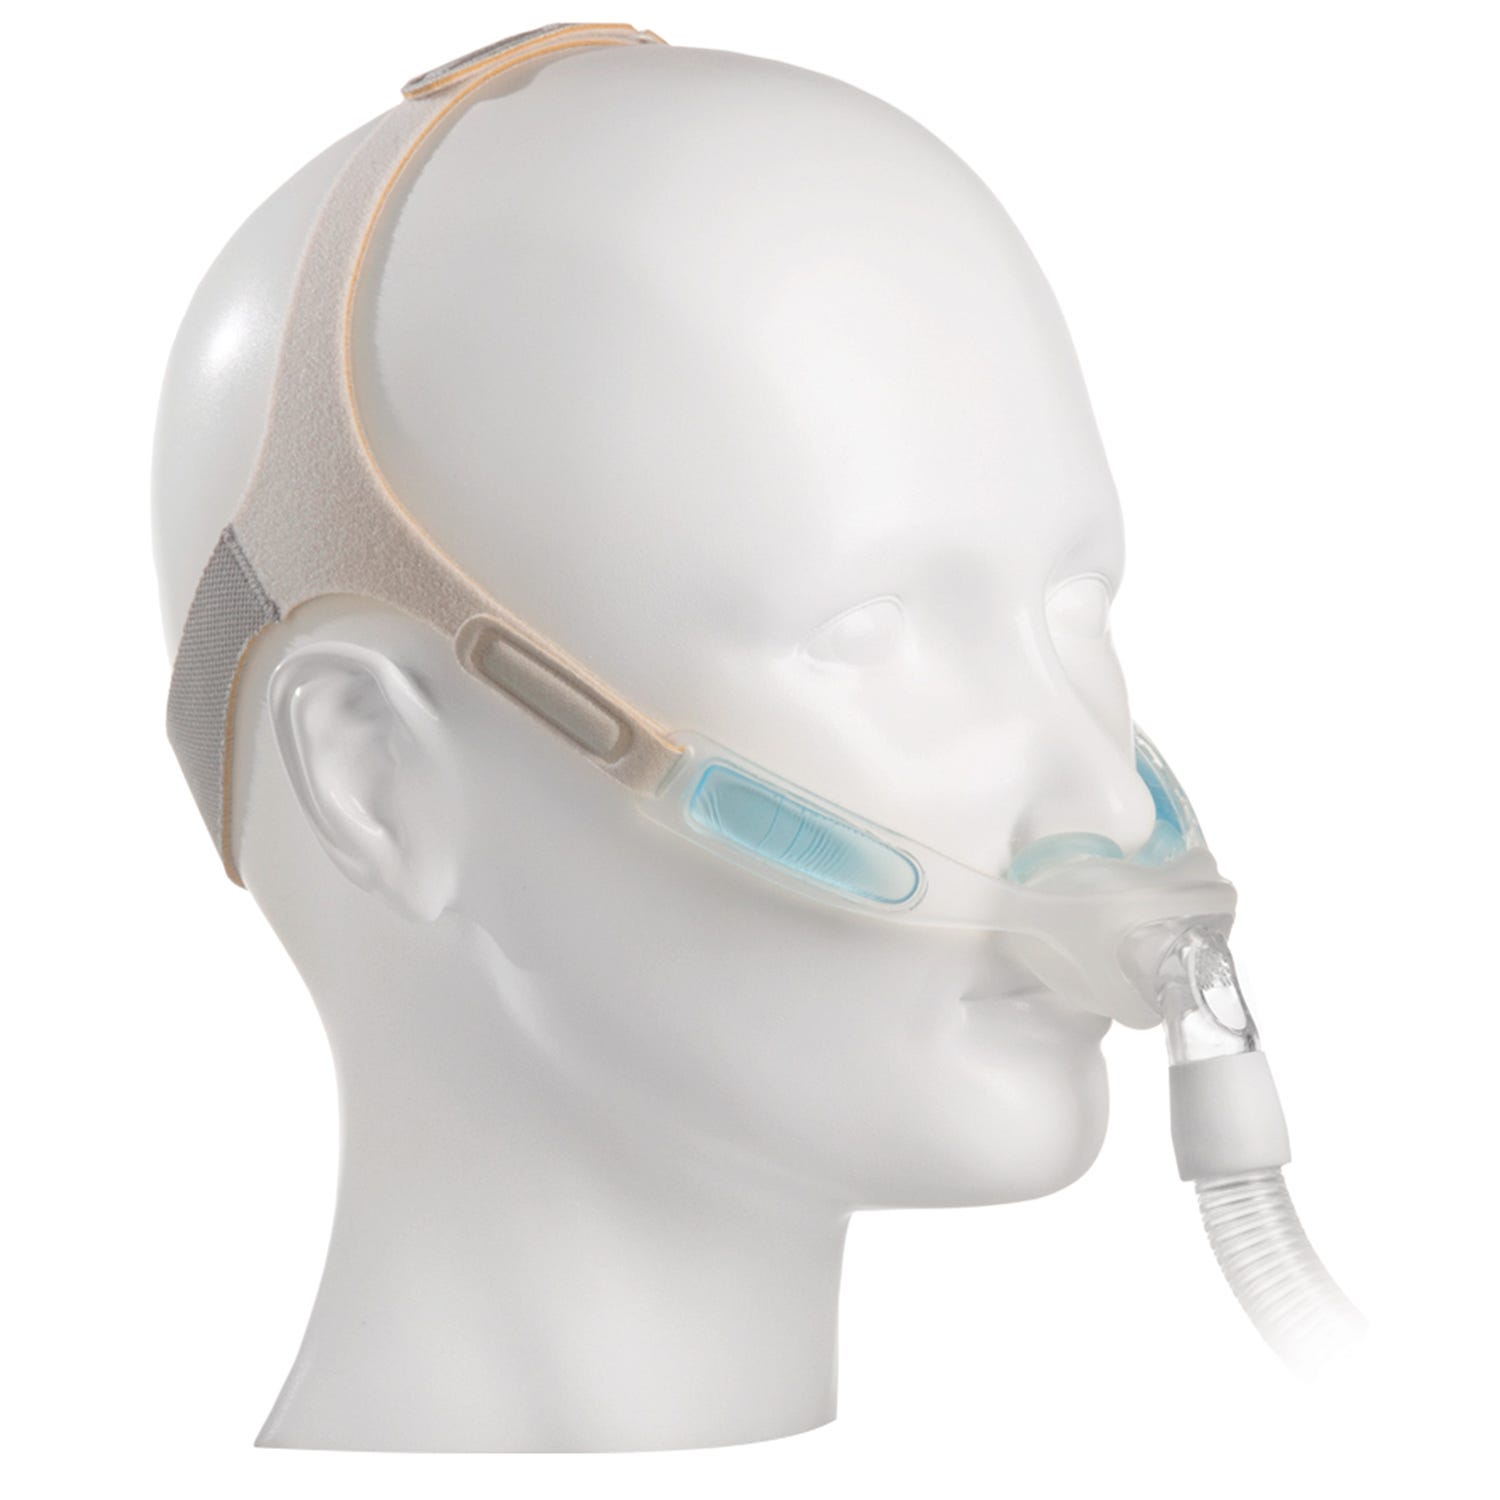 Philips nuance pro nasal pillow system space escapade les baxter